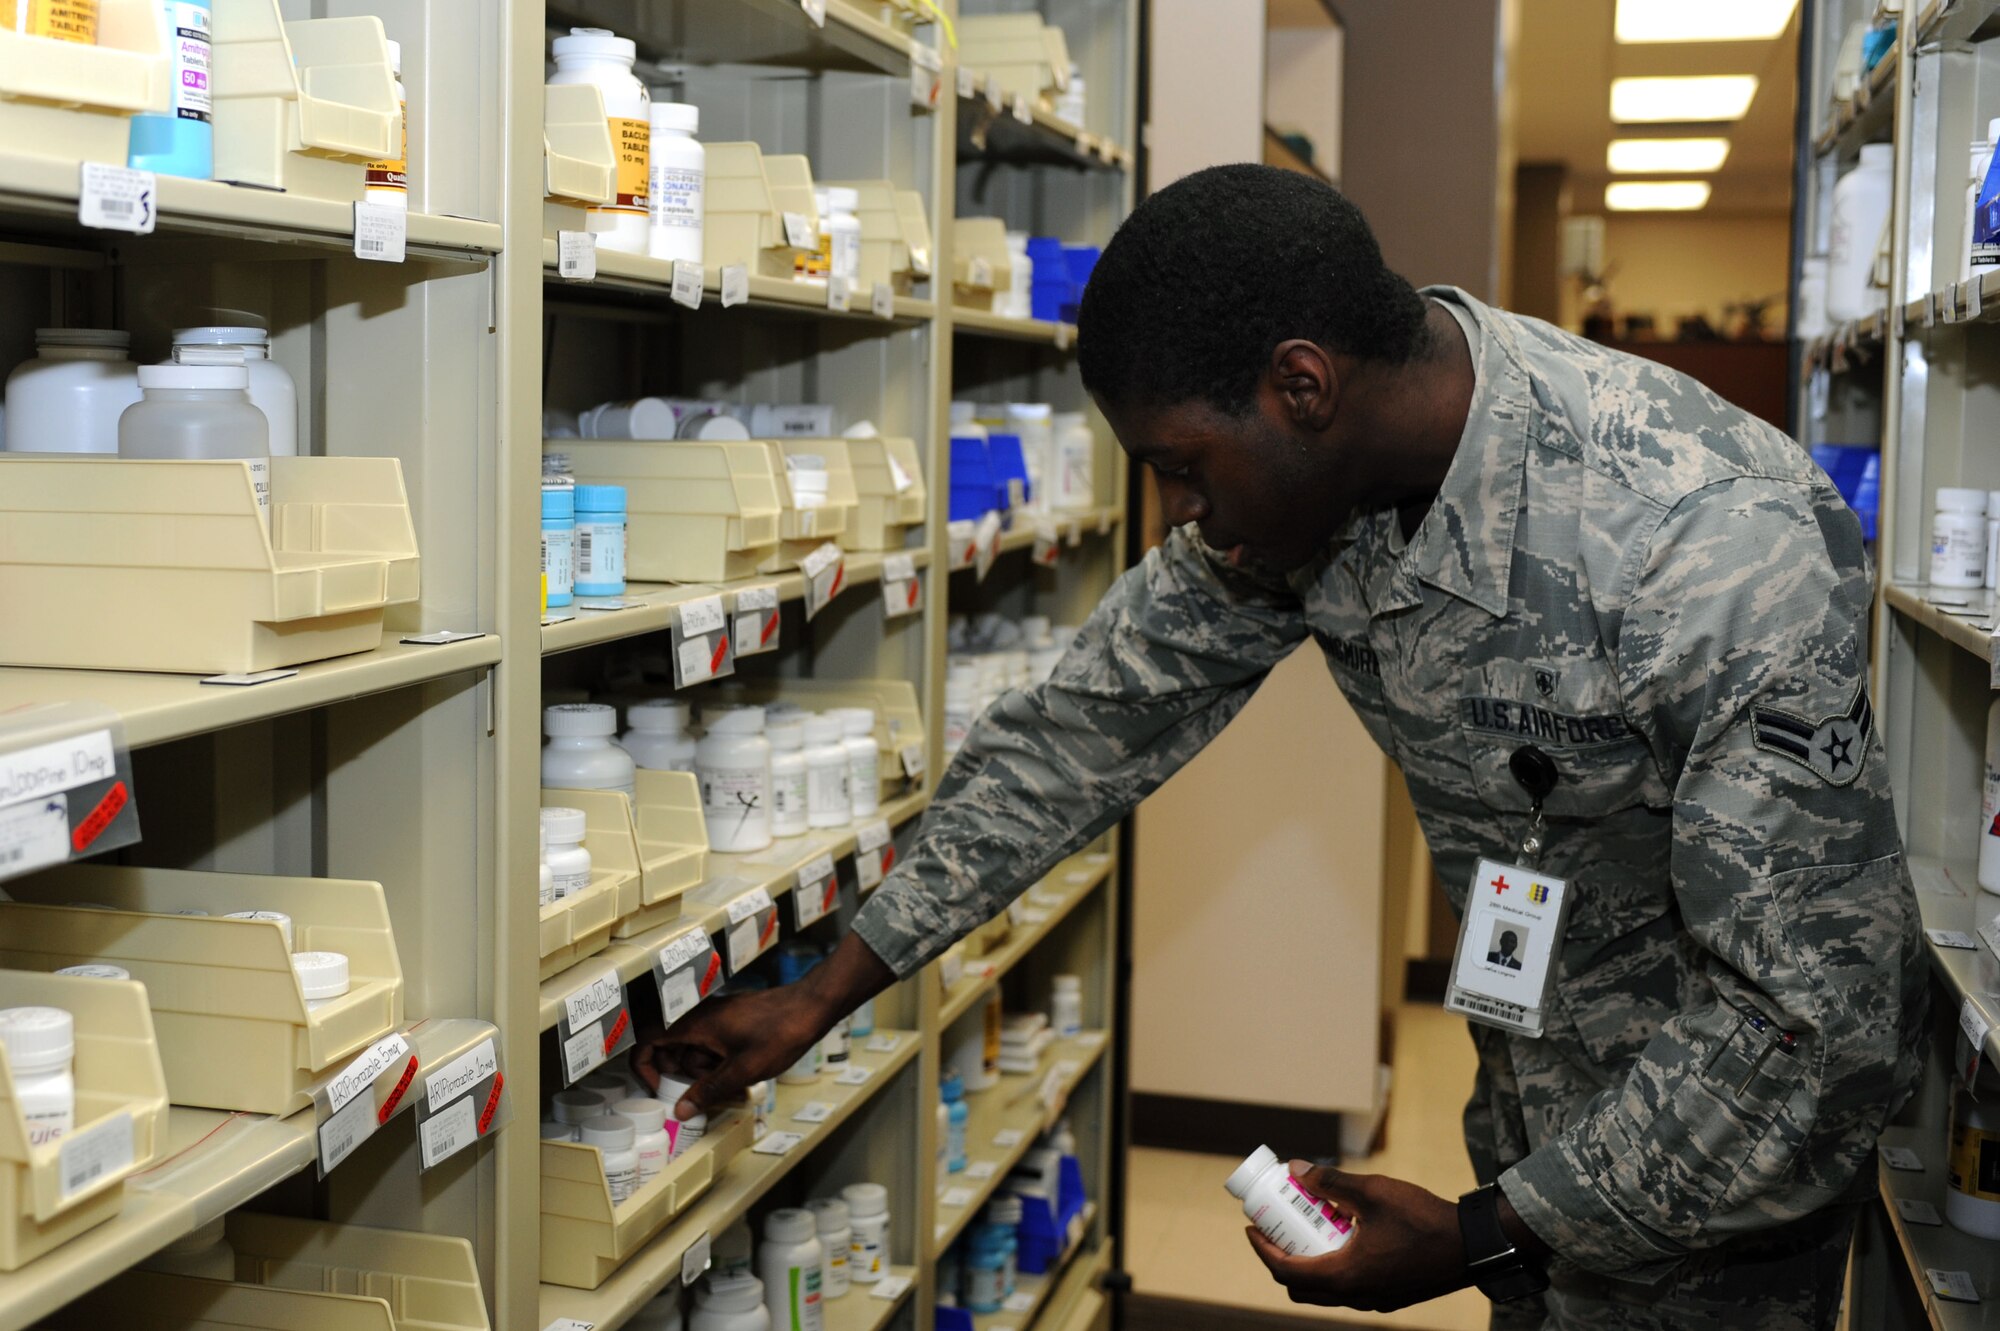 Airman 1st Class Darius Longmire, 28th Medical Support Squadron pharmacy technician, removes a bottle of Vitamin D from the pharmacy stock shelf at Ellsworth Air Force Base, S.D., Jan. 13, 2016. Pharmacy technicians remove medication to fill prescriptions for customers, and fill an average of 13,000 per month, including new scripts and refills. (U.S. Air Force photo by Senior Airman Hailey R. Staker/Released)